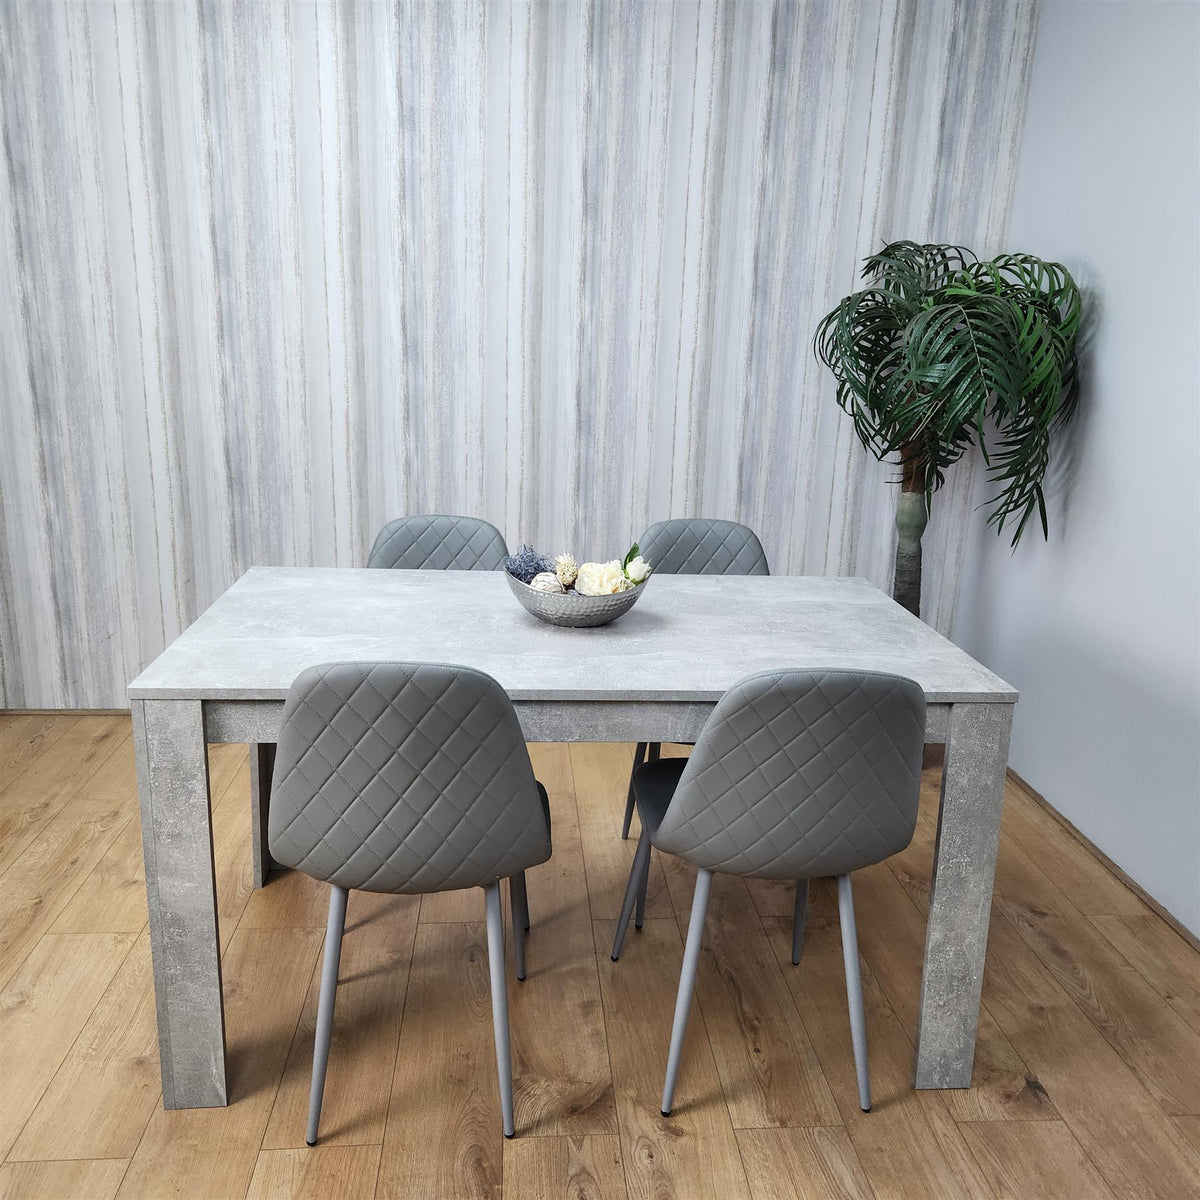 Wooden Rectangle Dining Table Sets with Set of 4 Chairs for Dining Room, Grey